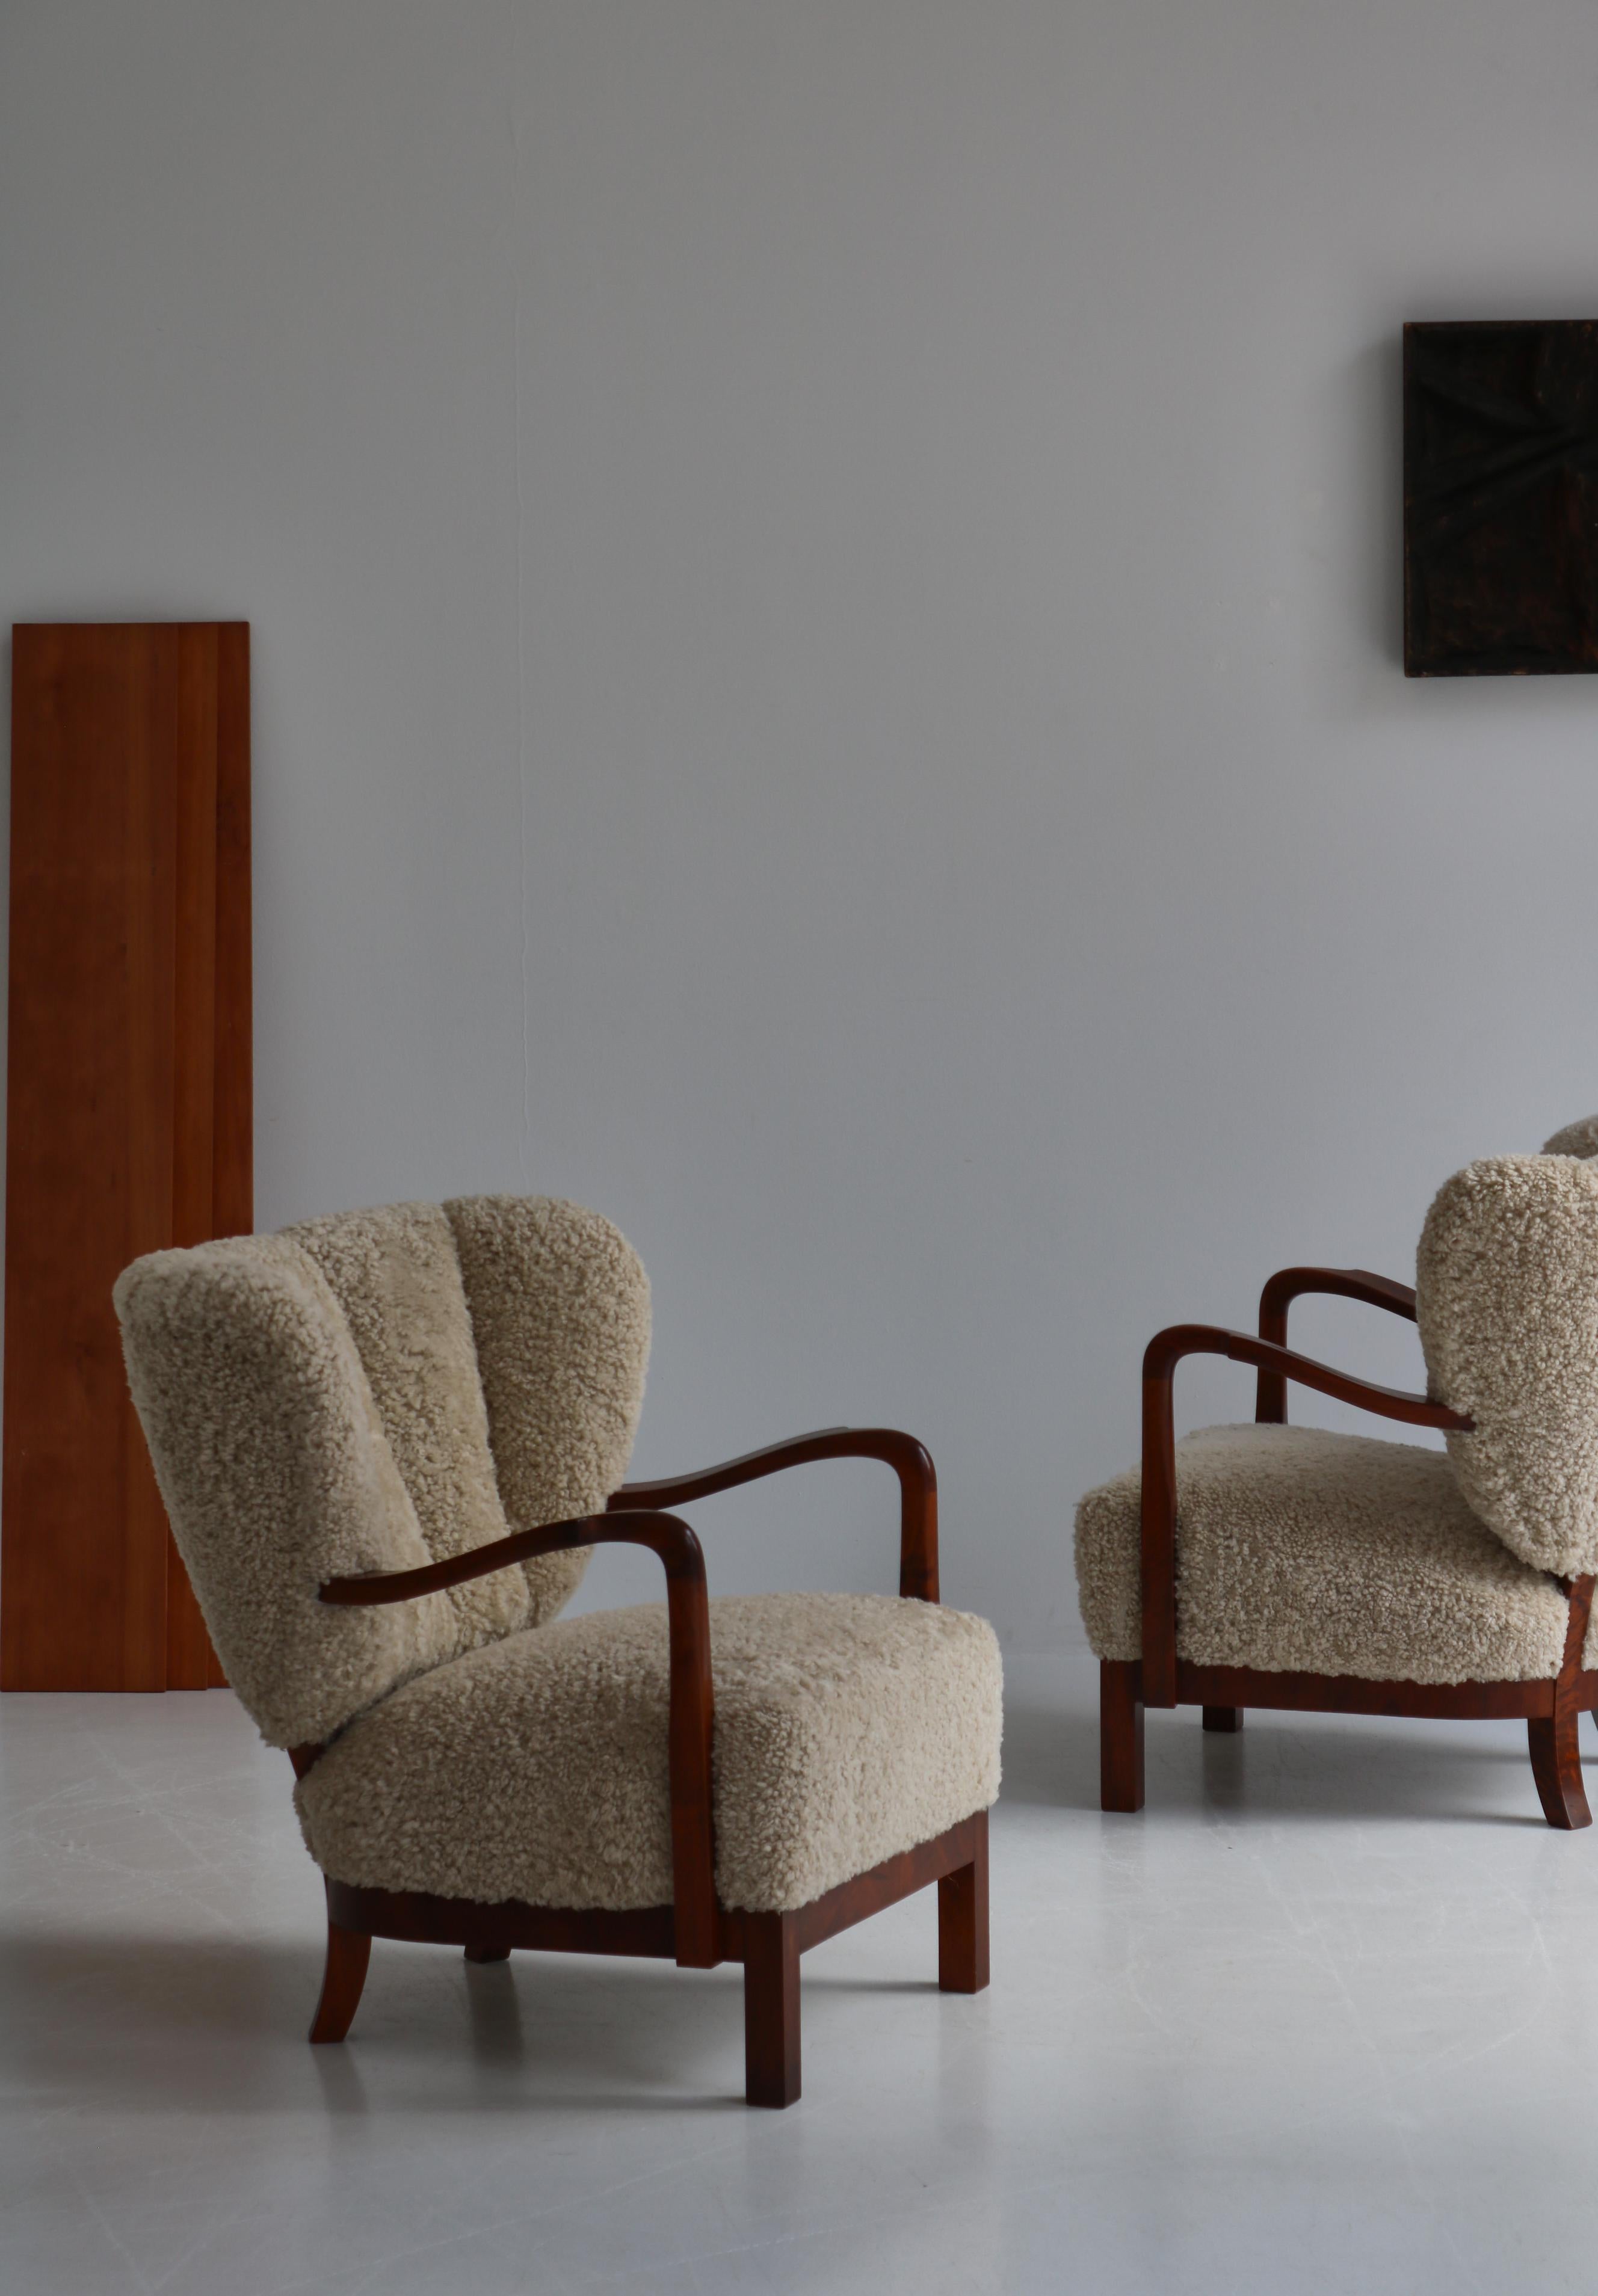 Absolutely amazing pair of 1930s Scandinavian Modern easy chairs attributed to Danish architect Viggo Boesen. The chairs are made from nutwood and has been reupholstered in beautiful natural sheepskin. They were most probably designed by Boesen in